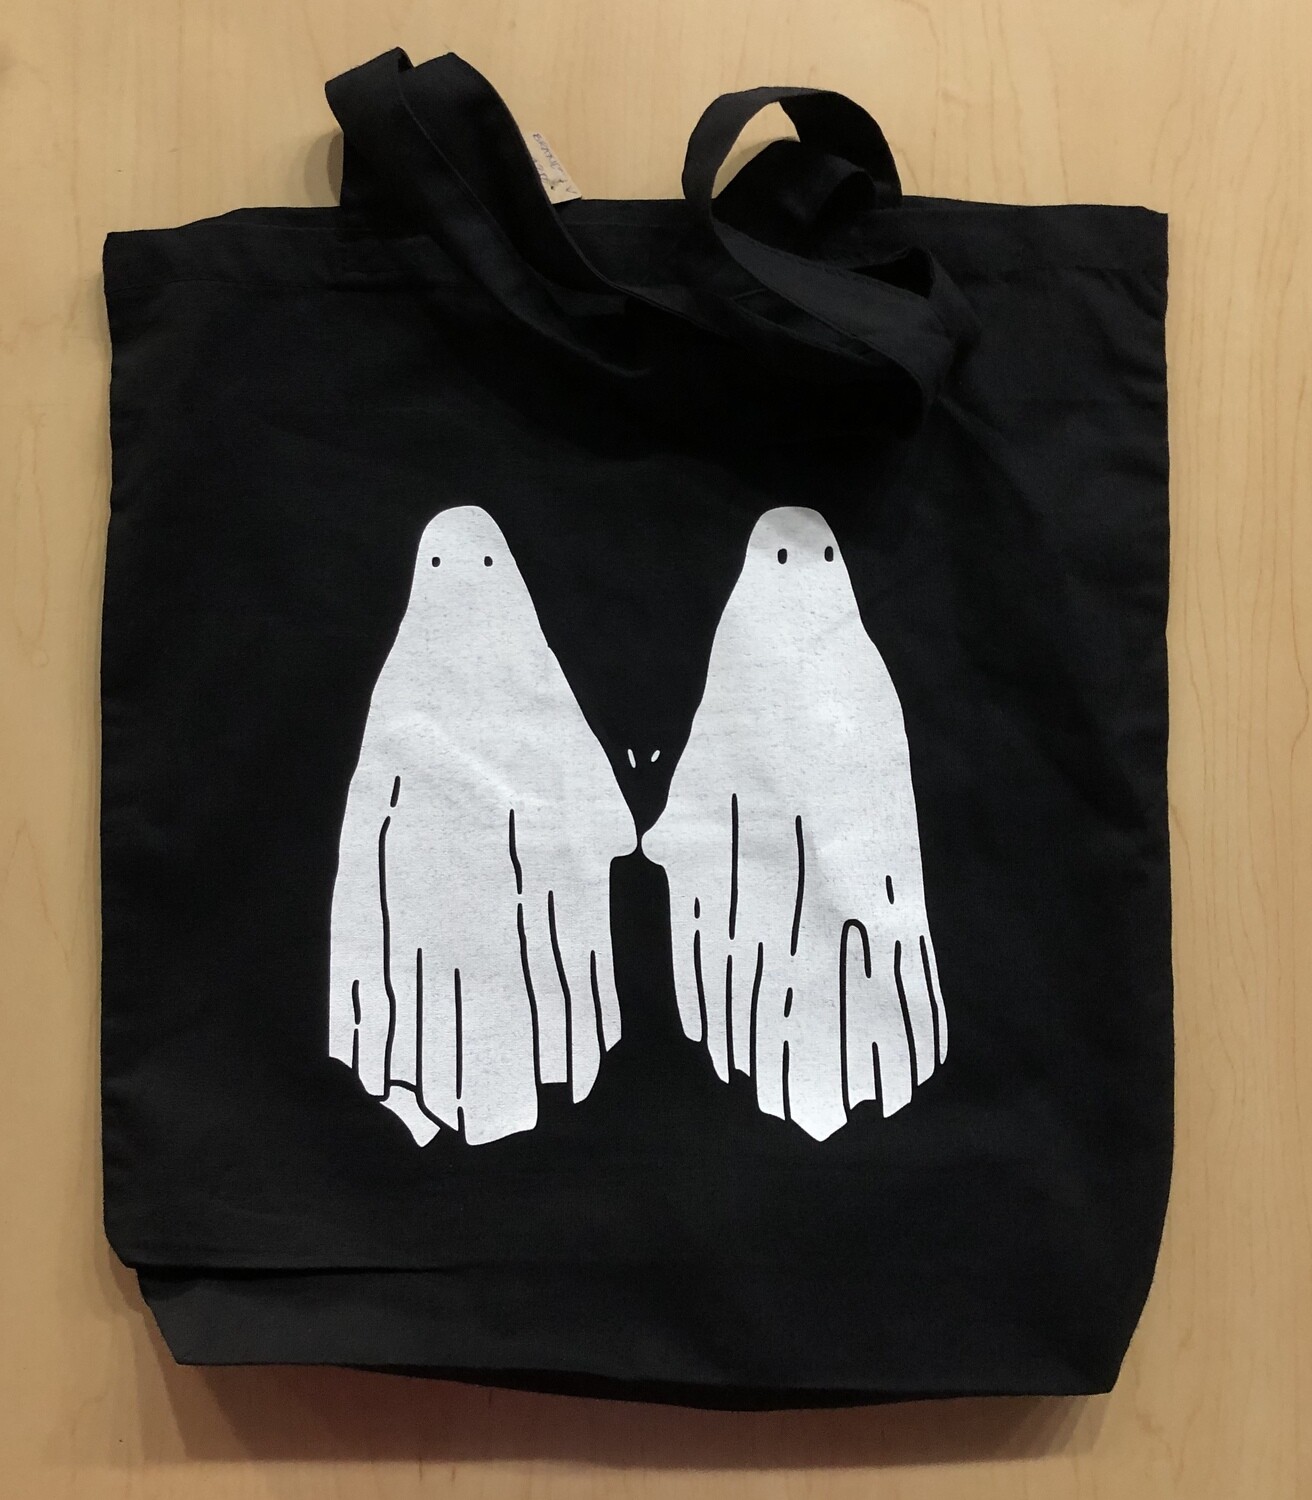 Ghost Fist Bump - Tote Bag by Brandon Vosika